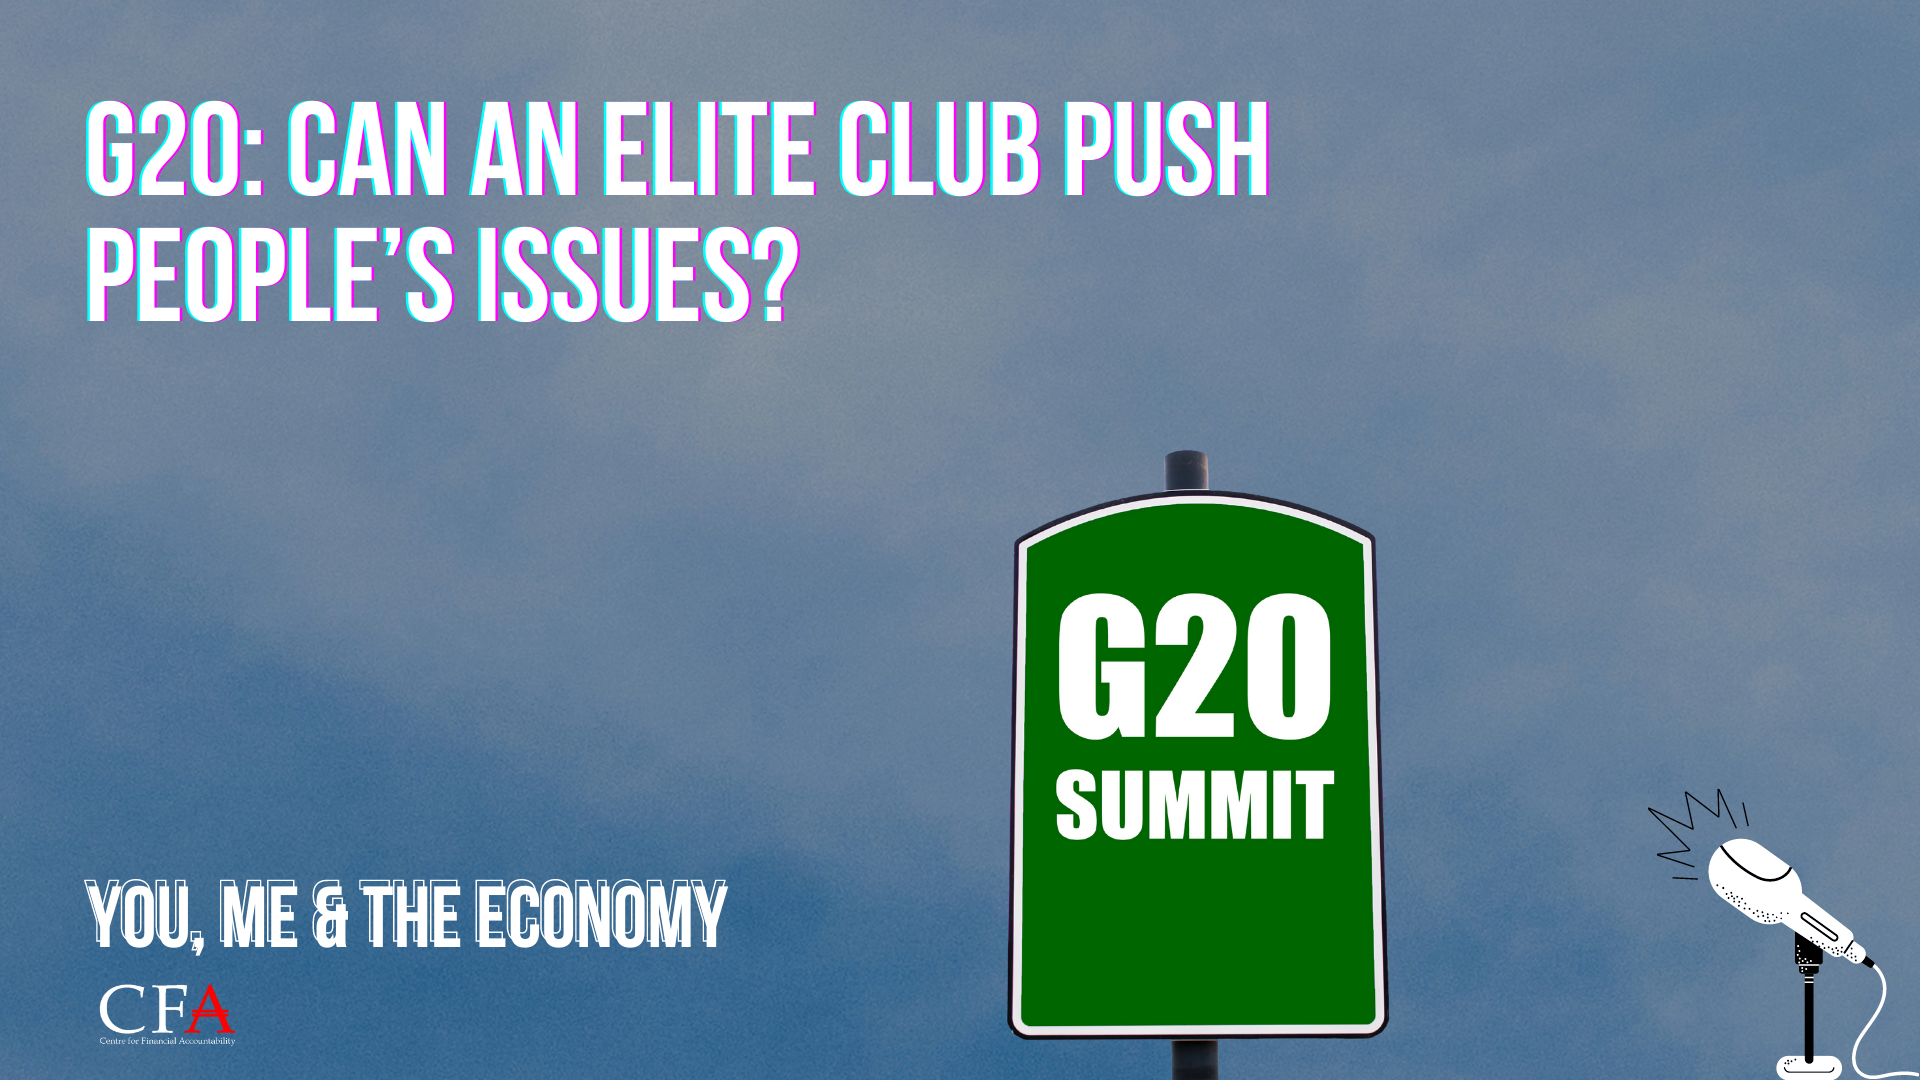 G20: Can an elite club push people’s issues?